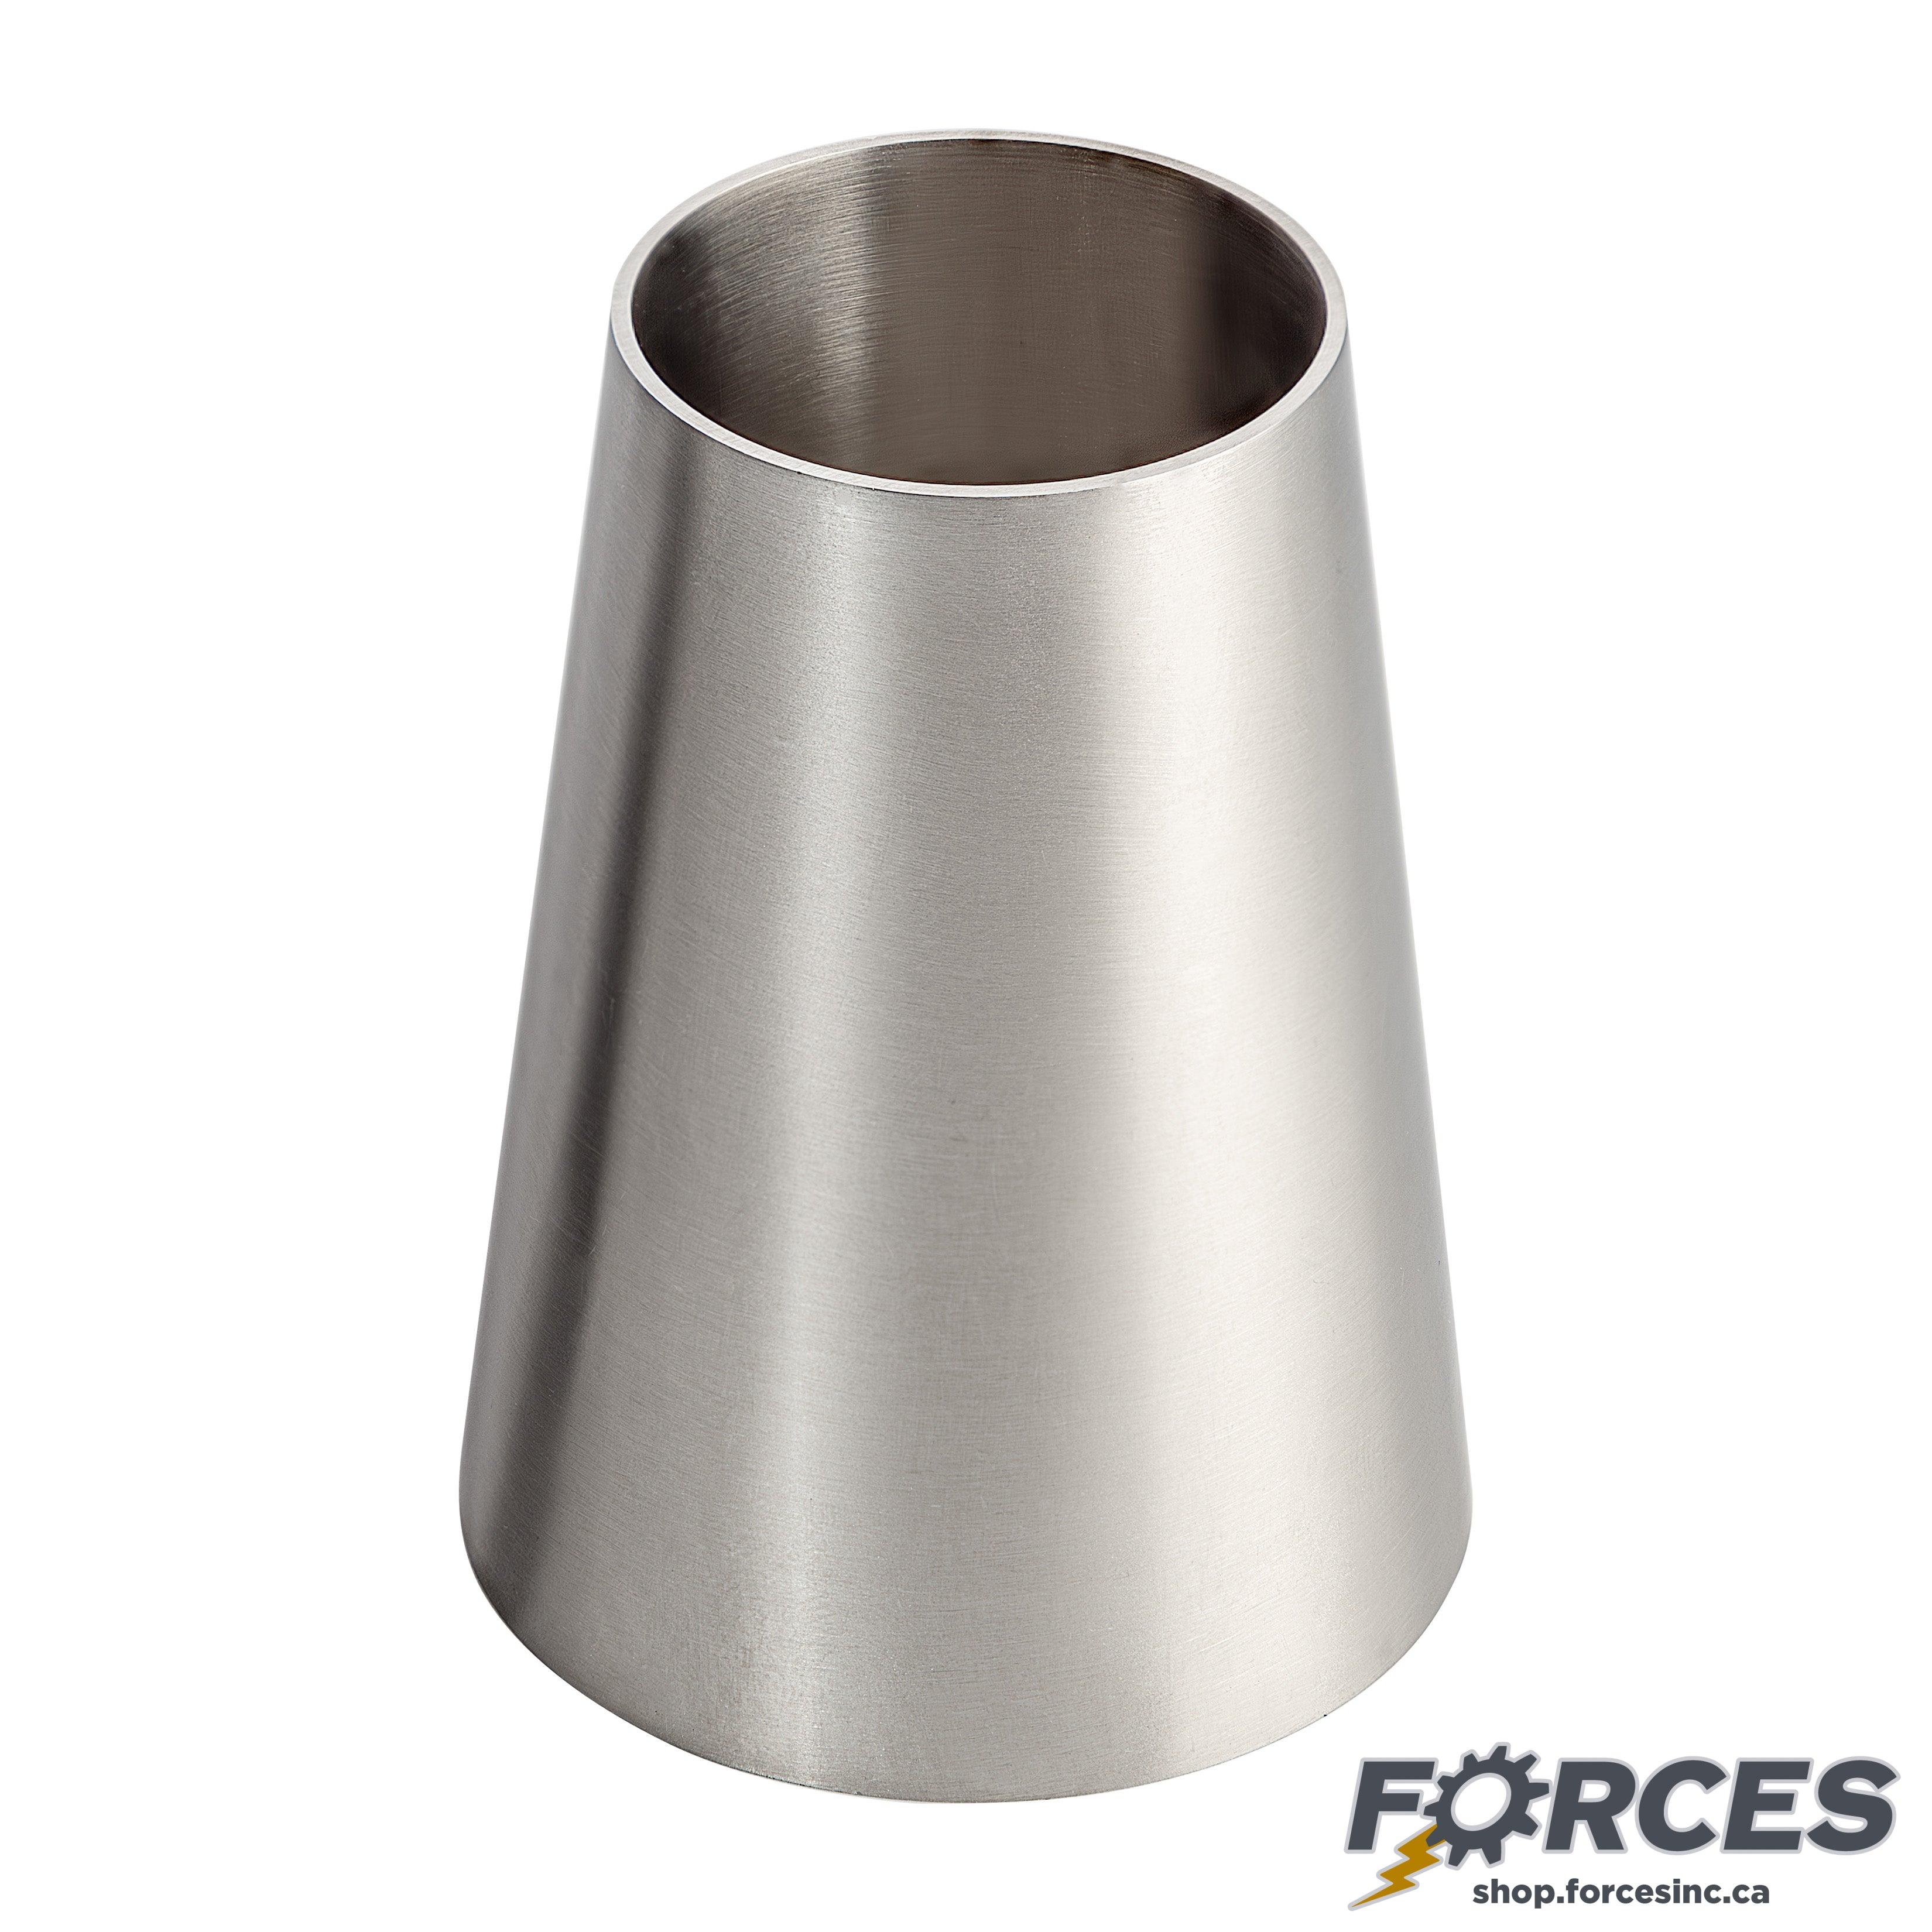 6" x 4" Butt Weld Concentric Reducer - Stainless Steel 304 - Forces Inc